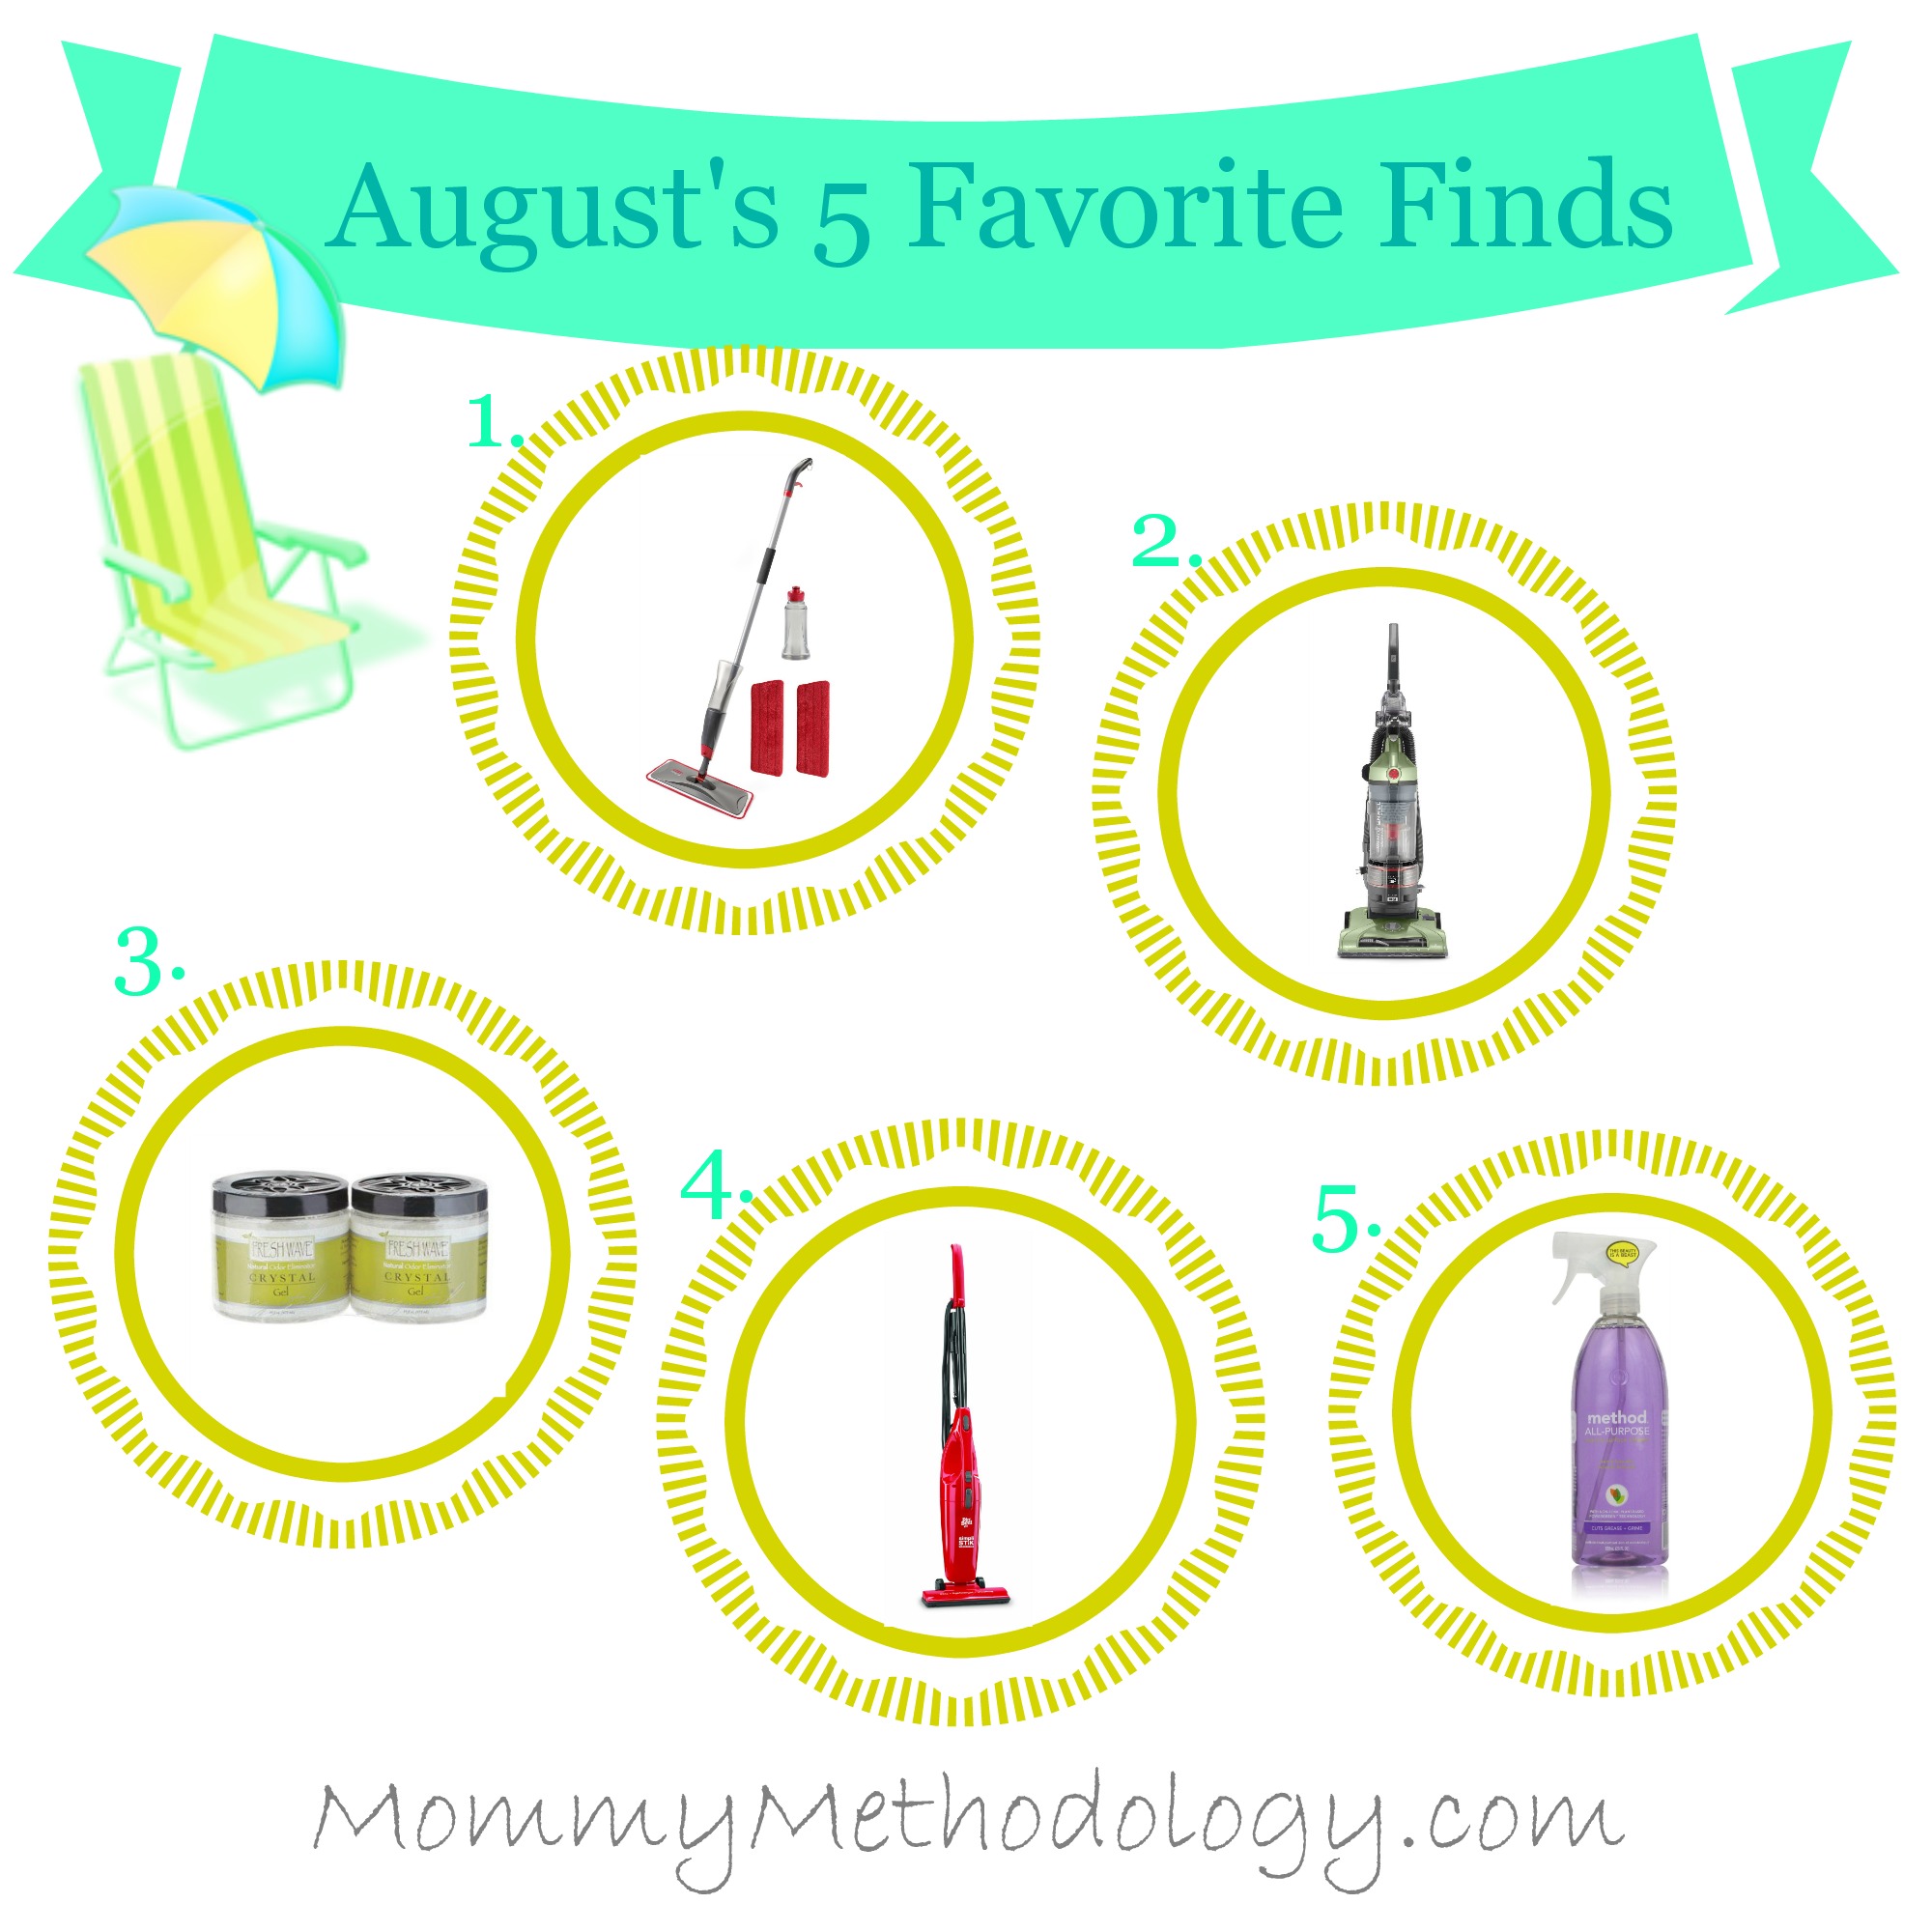 August's 5 Favorite Finds